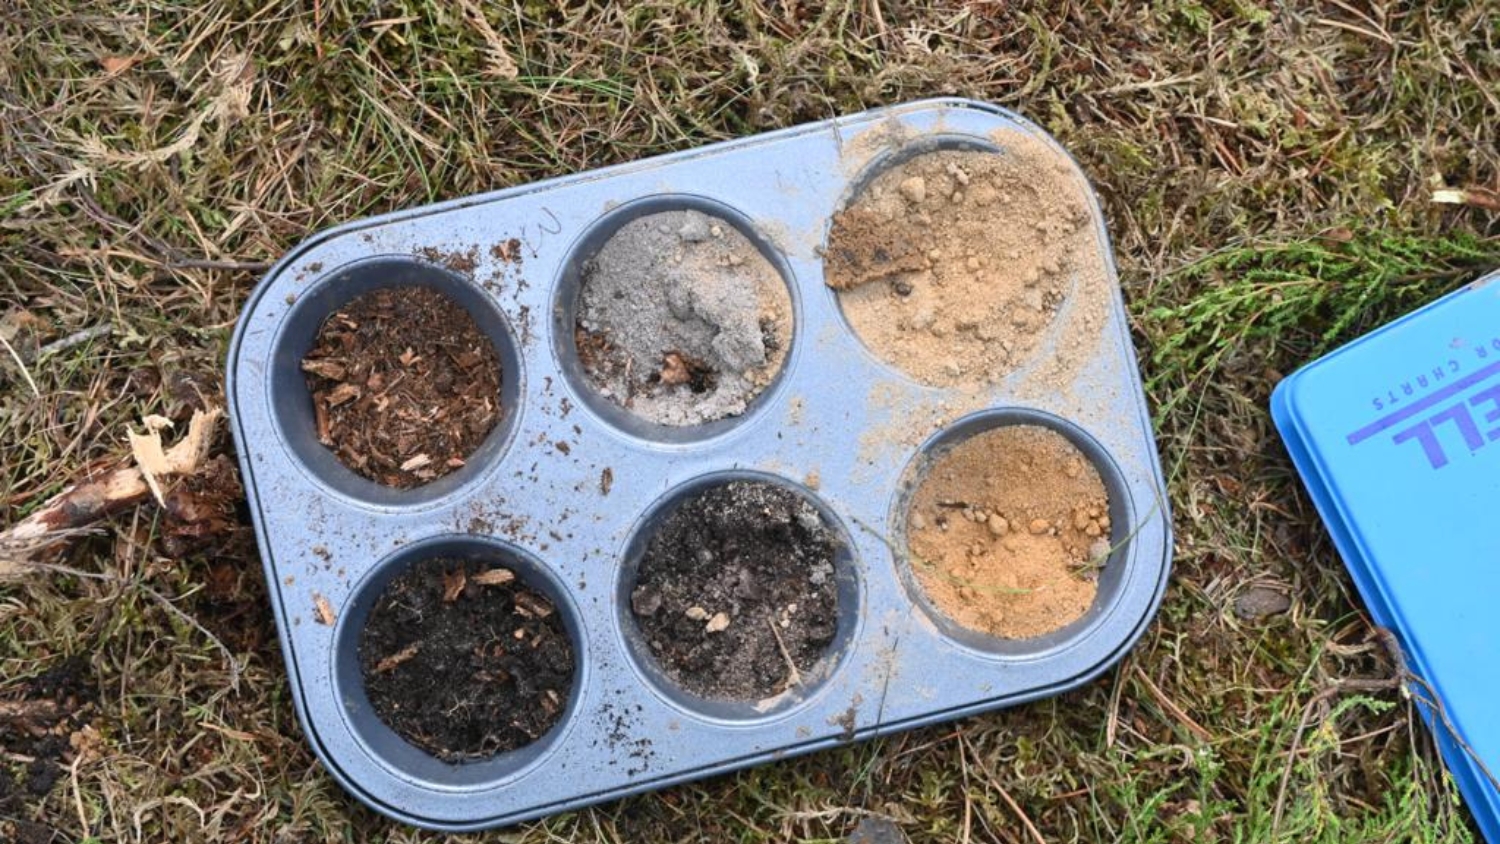 Soil samples from an NC State soil judging event